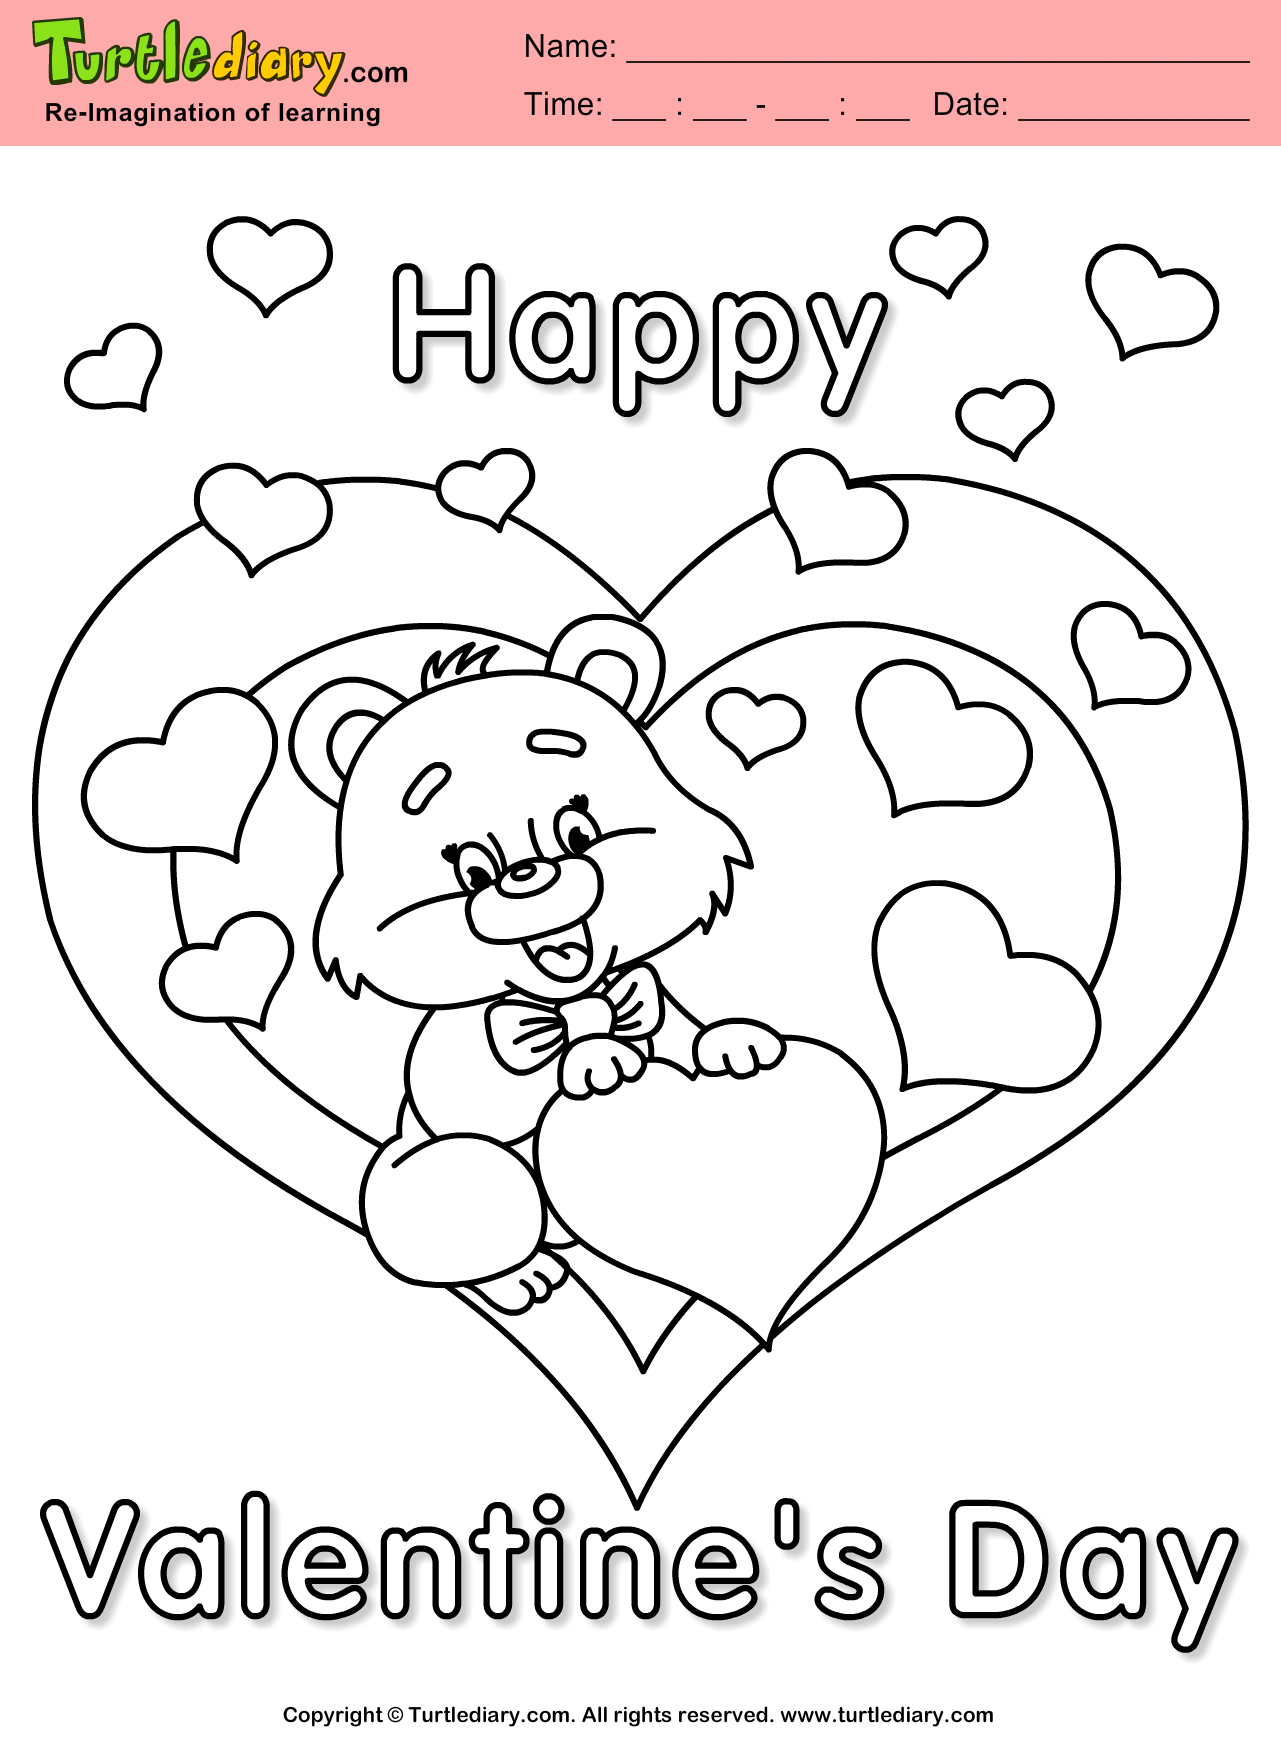 Teddy Bear with Heart Coloring Page